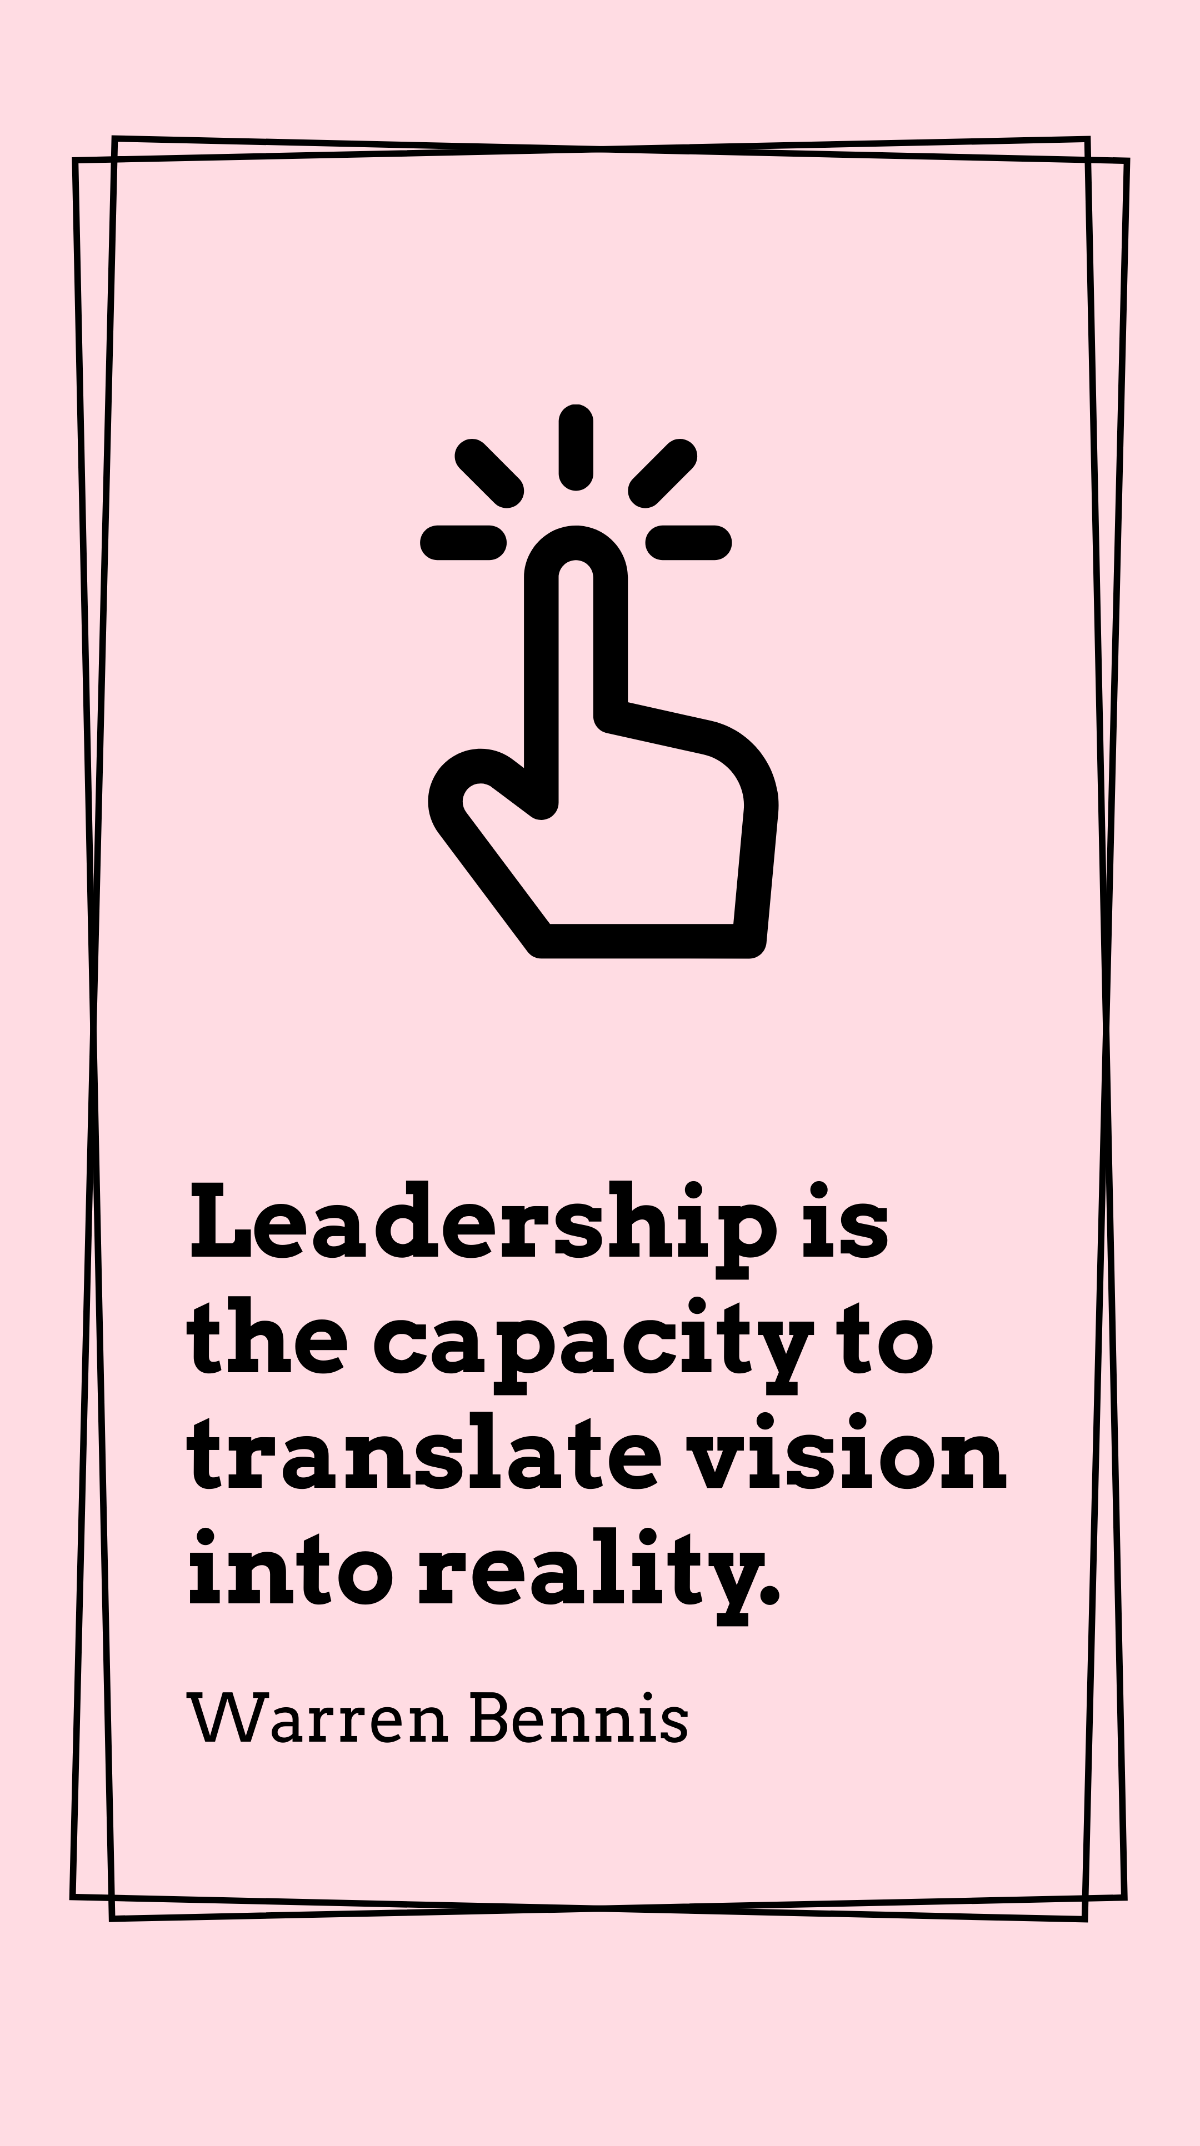 Warren Bennis - Leadership is the capacity to translate vision into reality.